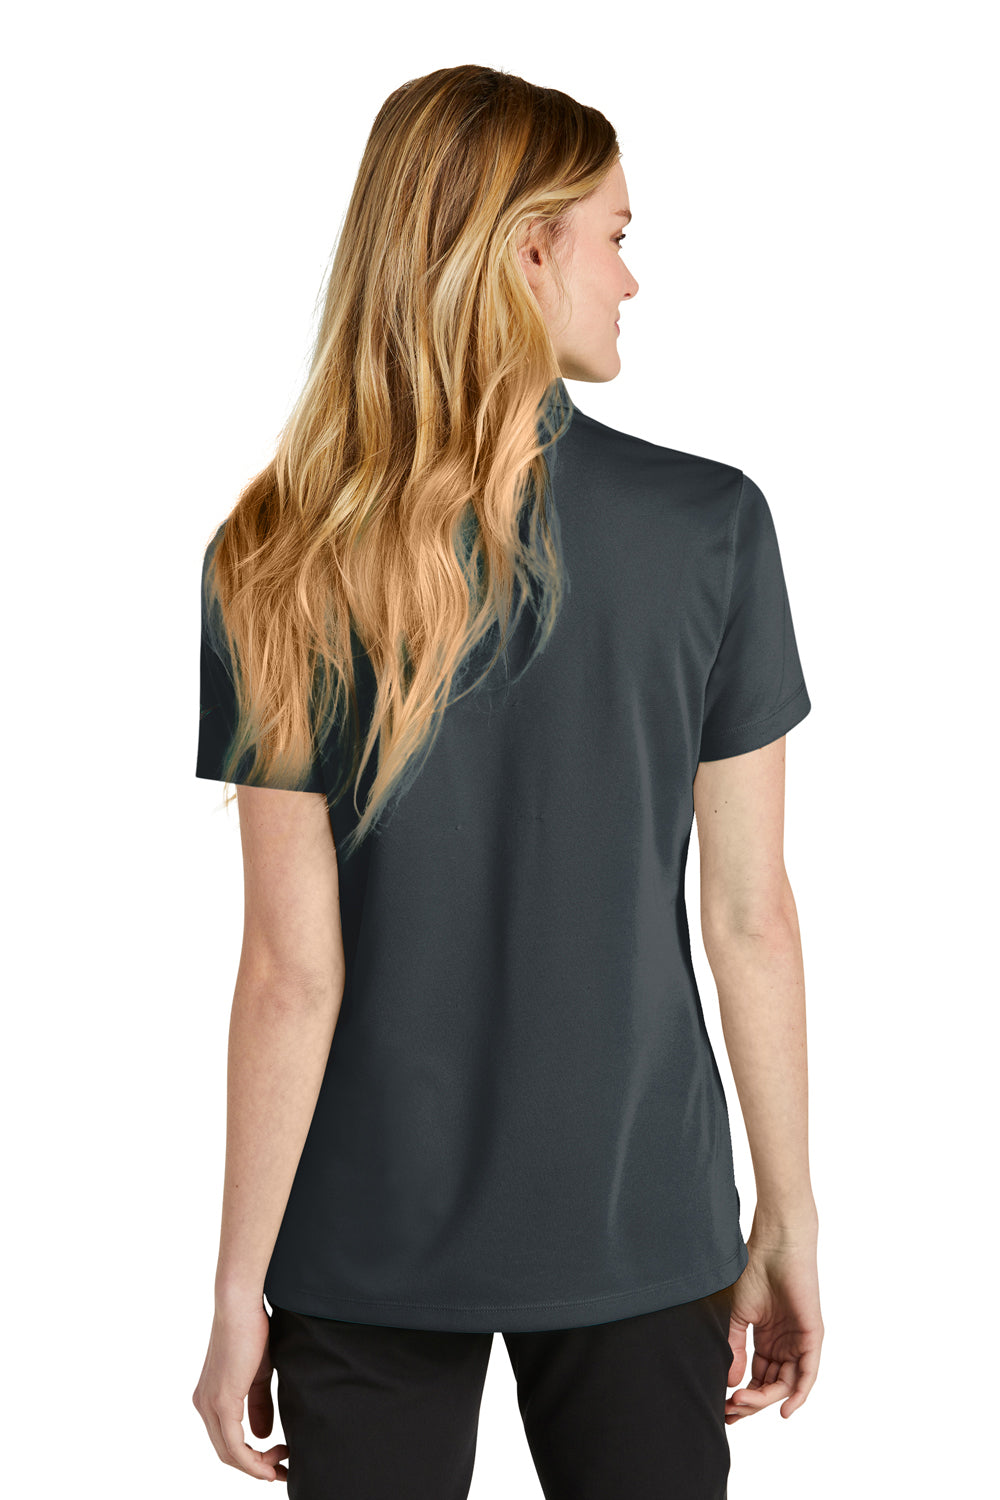 Nike NKDC1991 Womens Dri-Fit Moisture Wicking Micro Pique 2.0 Short Sleeve Polo Shirt Anthracite Grey Model Back